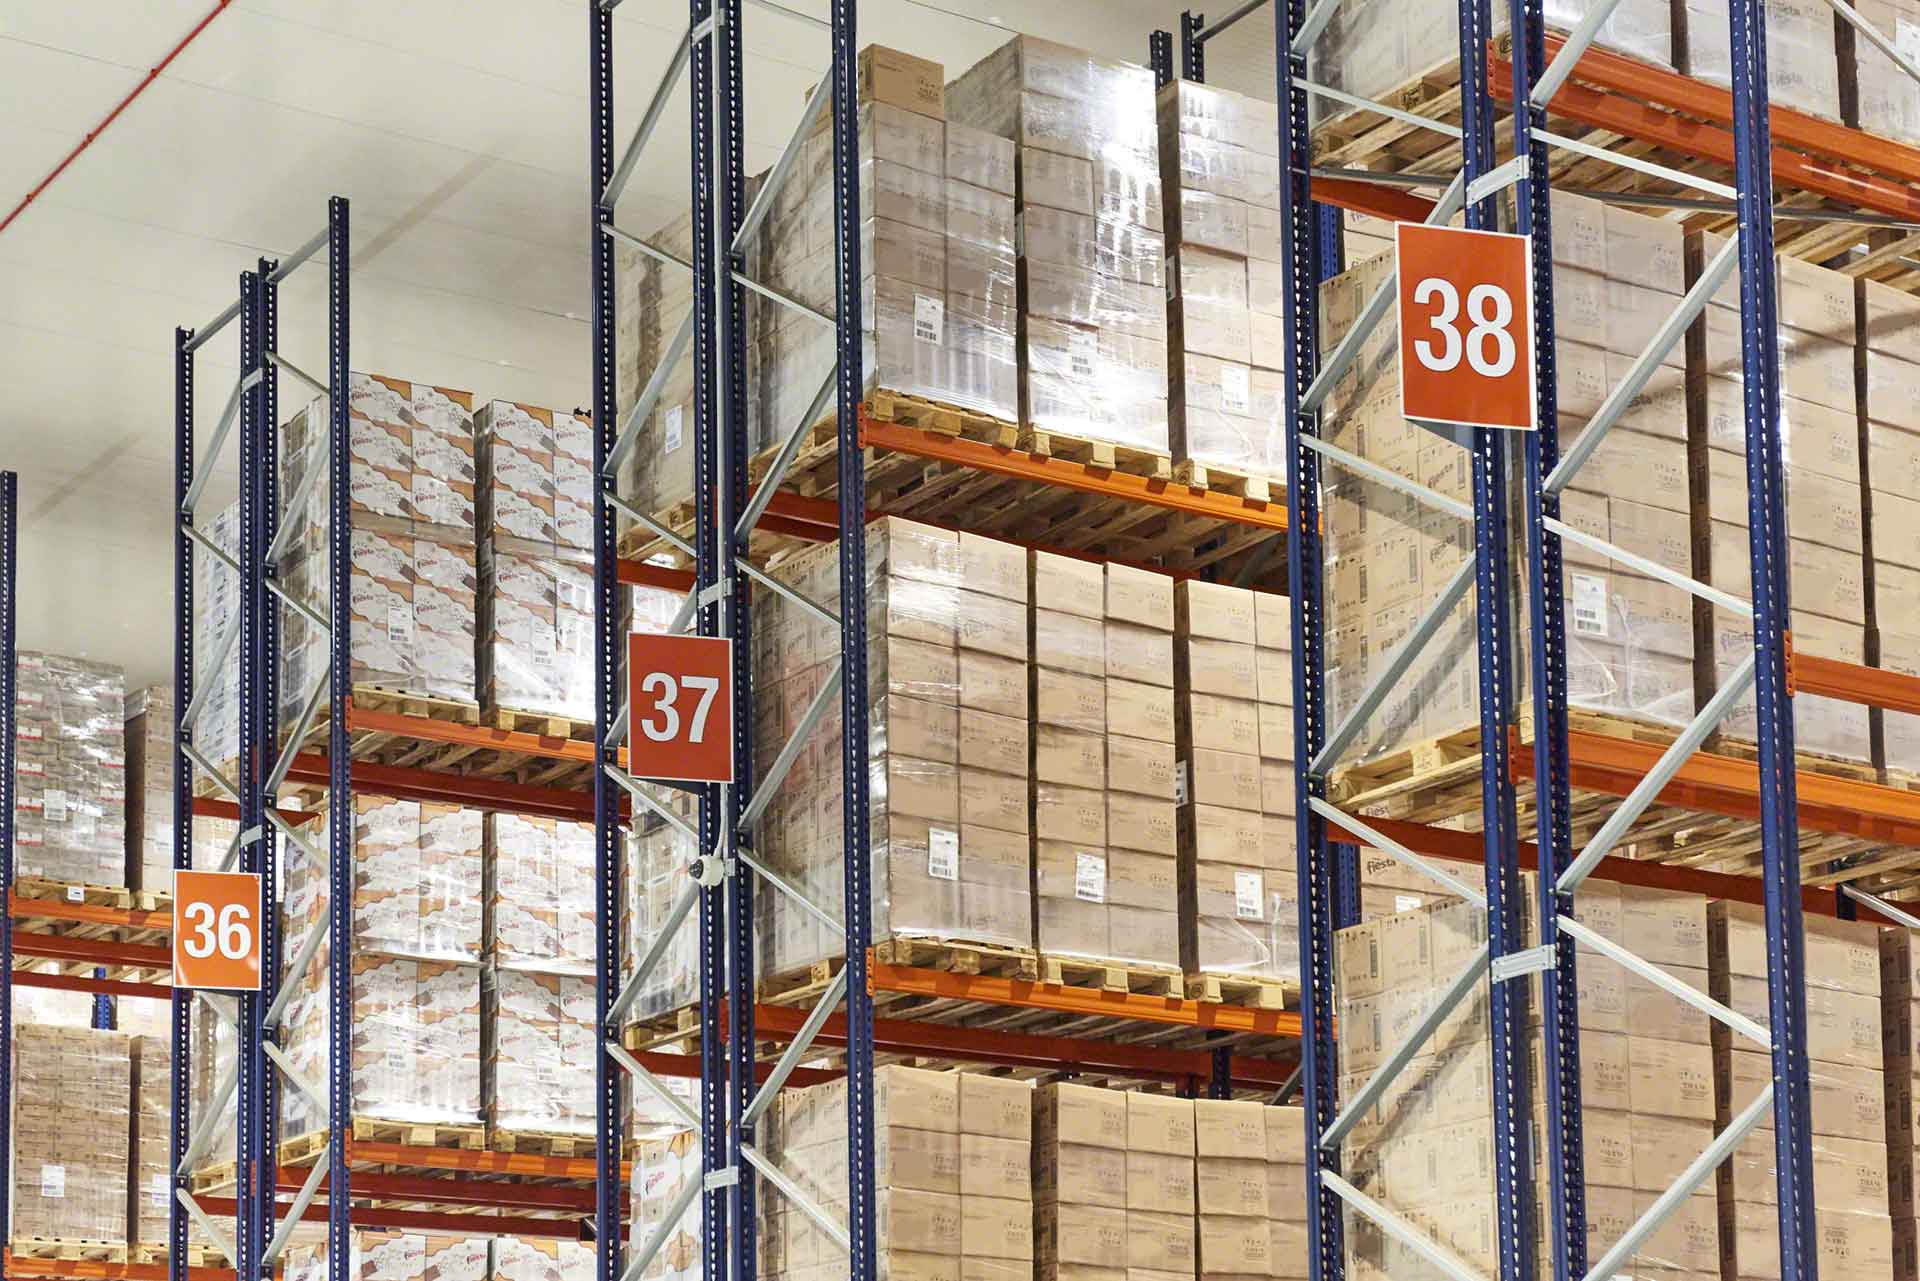 Palletization is key for ensuring the safety of loads in the warehouse